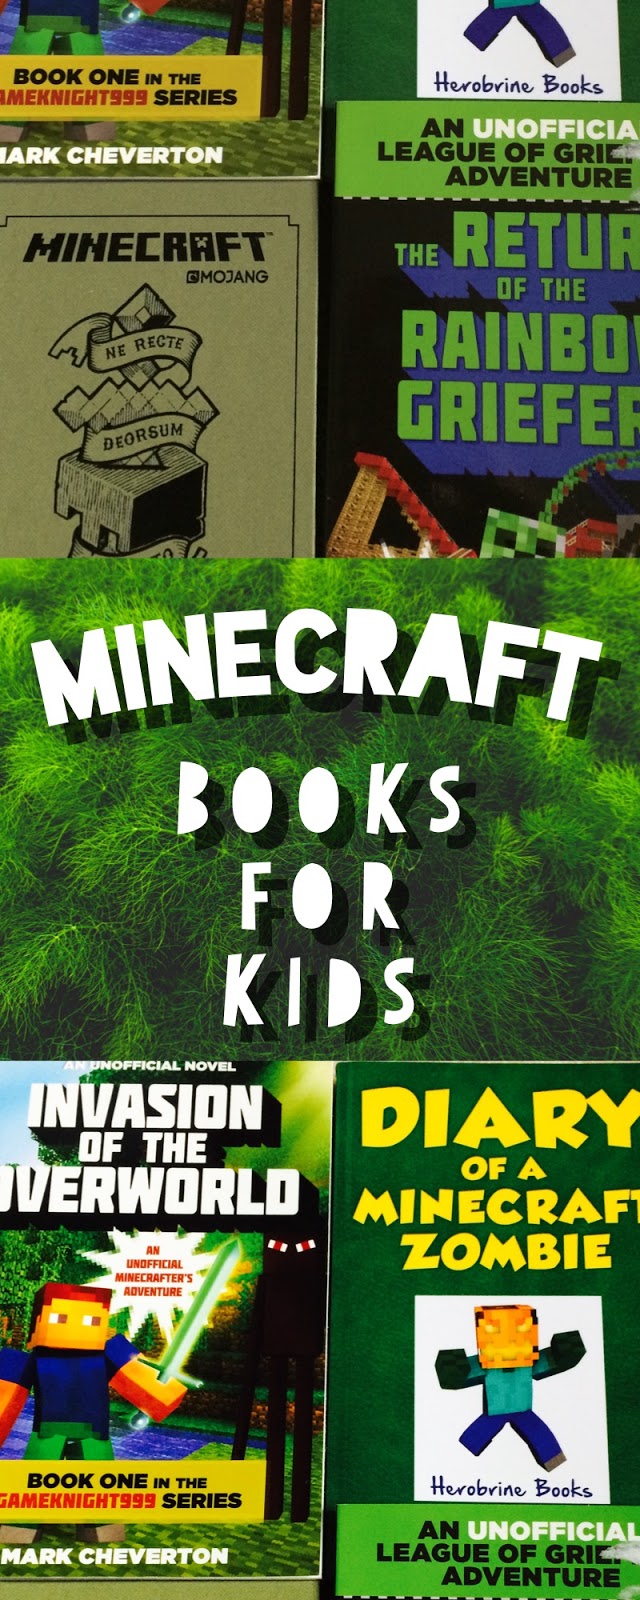 The Jersey Momma Minecraft Books for Kids Inspiring Reluctant Readers